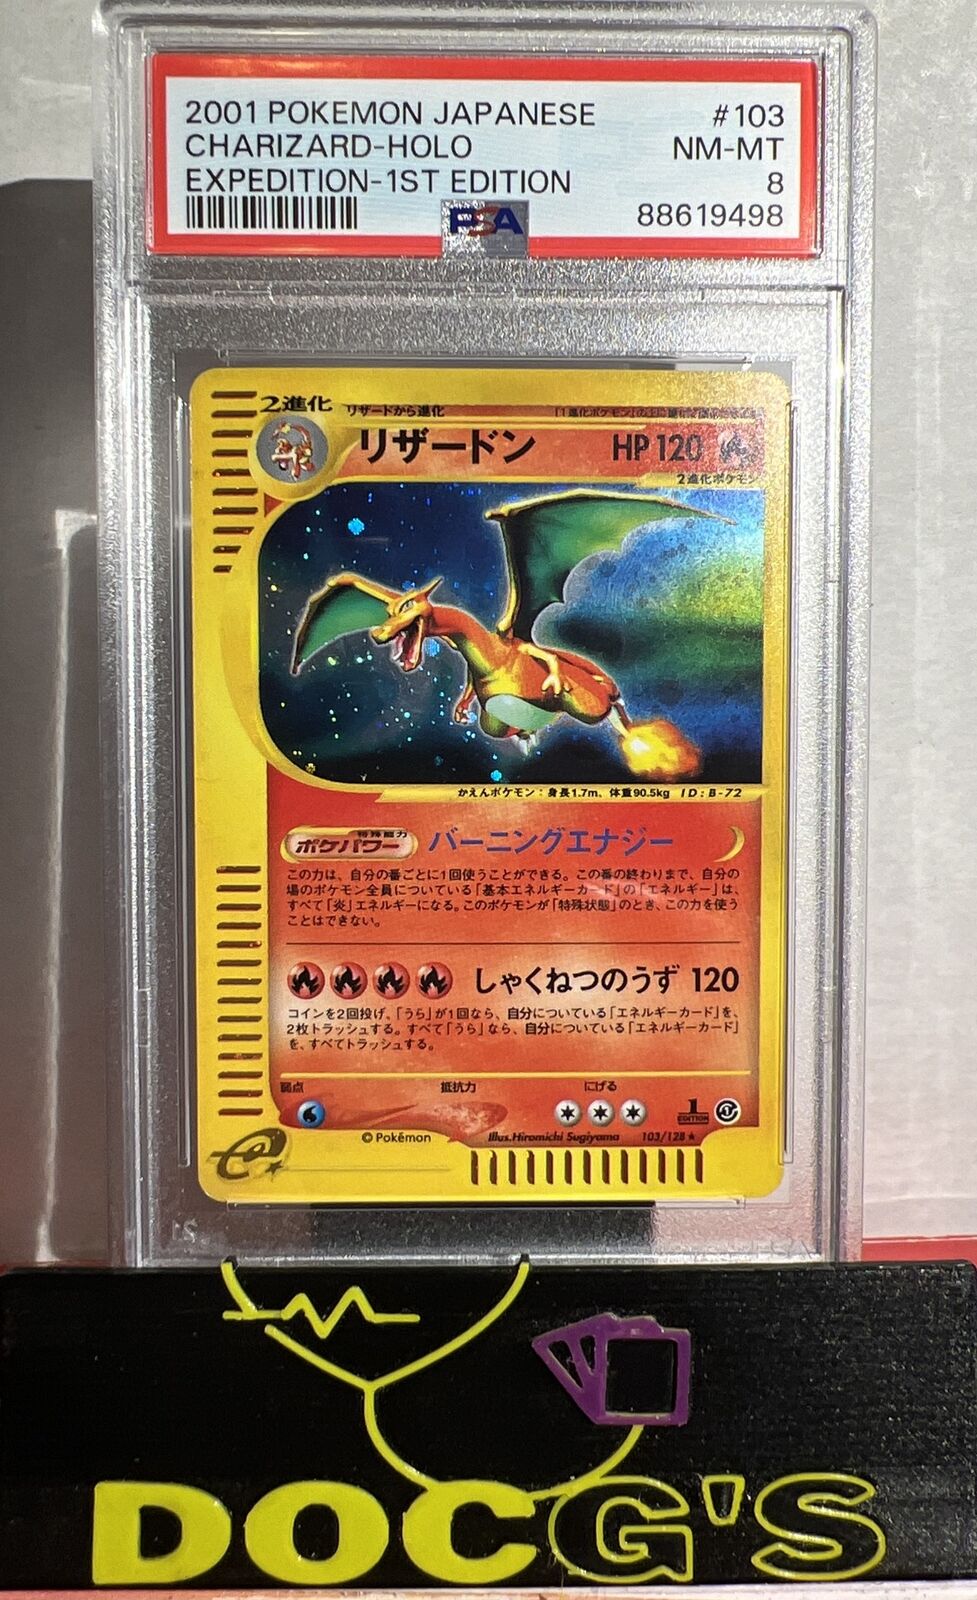 2001 Pokemon Japanese Expedition 1st Edition #103 Charizard - HOLO PSA 8 NM-MT